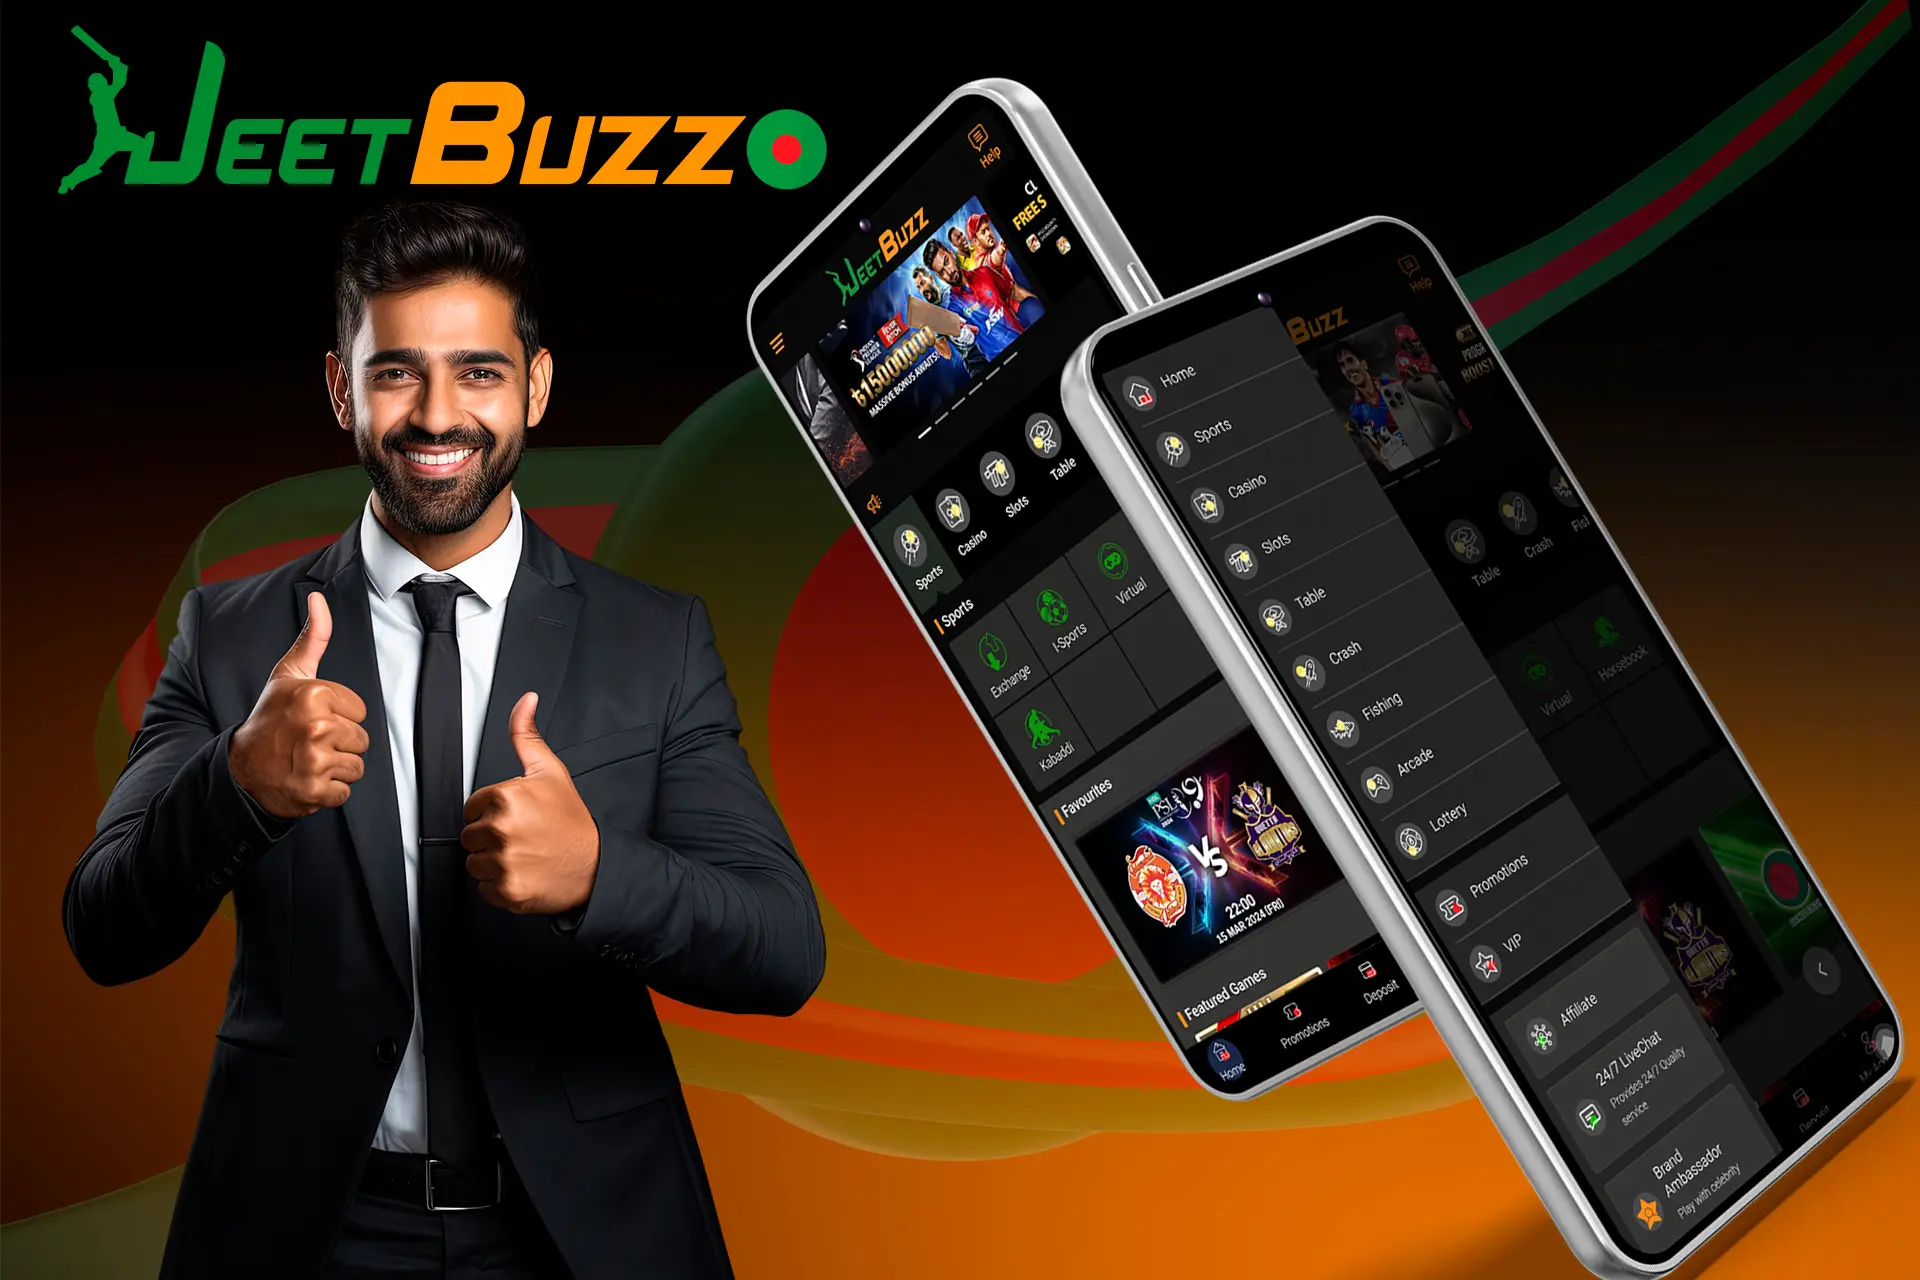 The JeetBuzz app has many benefits for even the most demanding gamer.